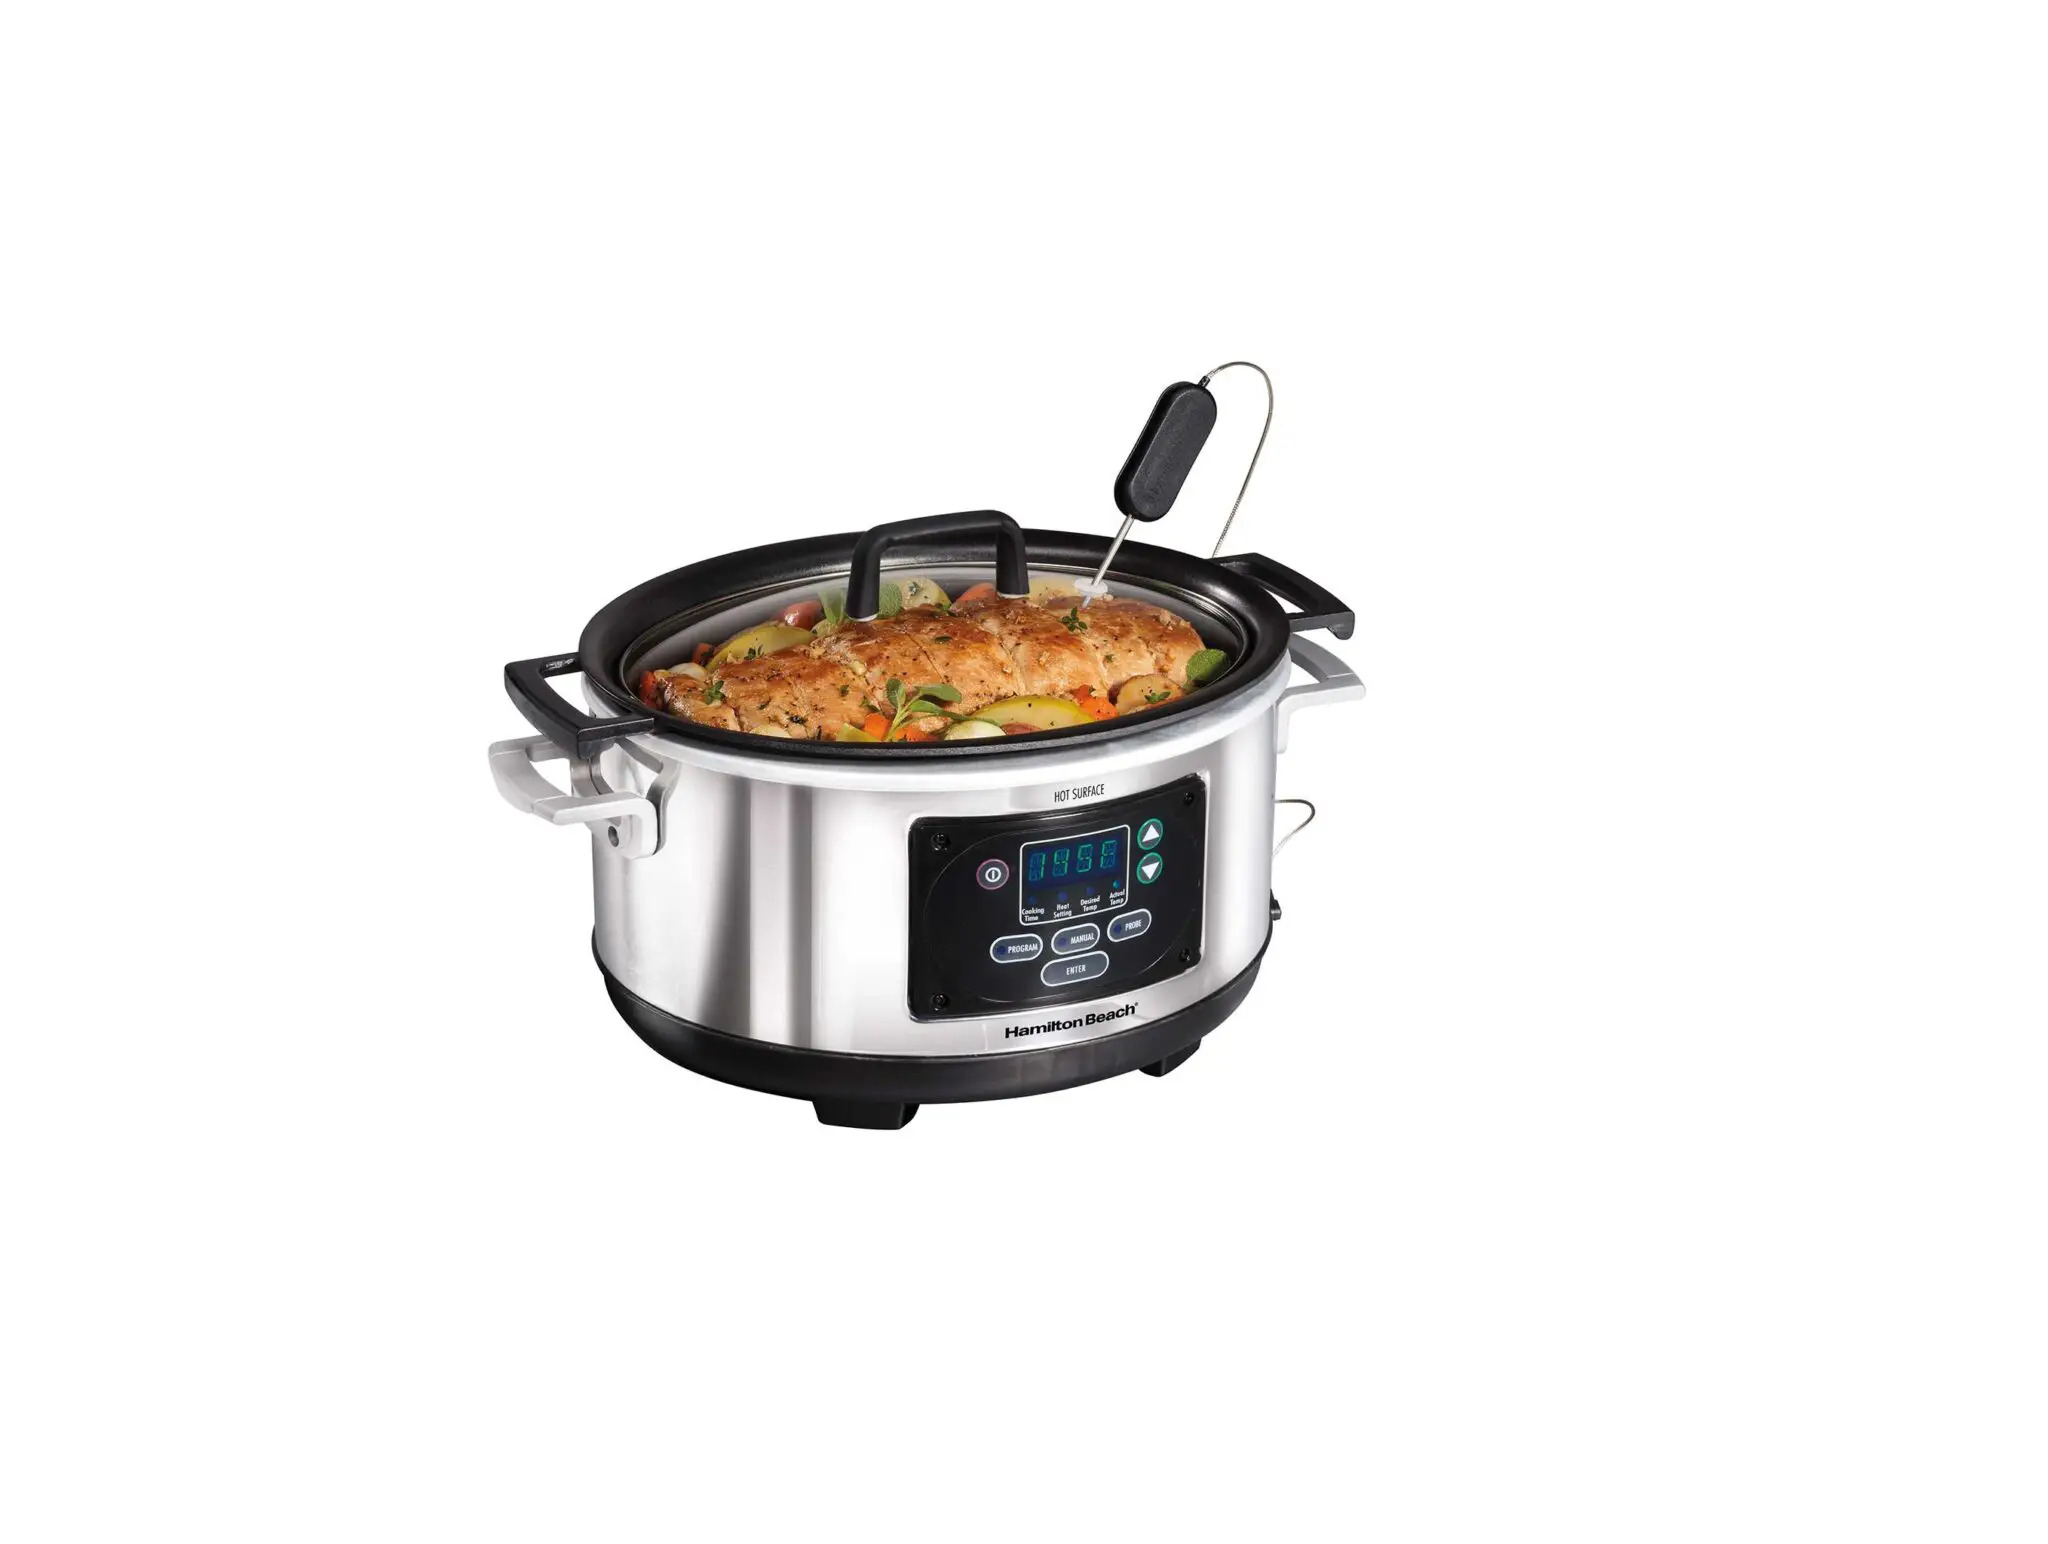 Beach Oval Programmable Slow Cooker